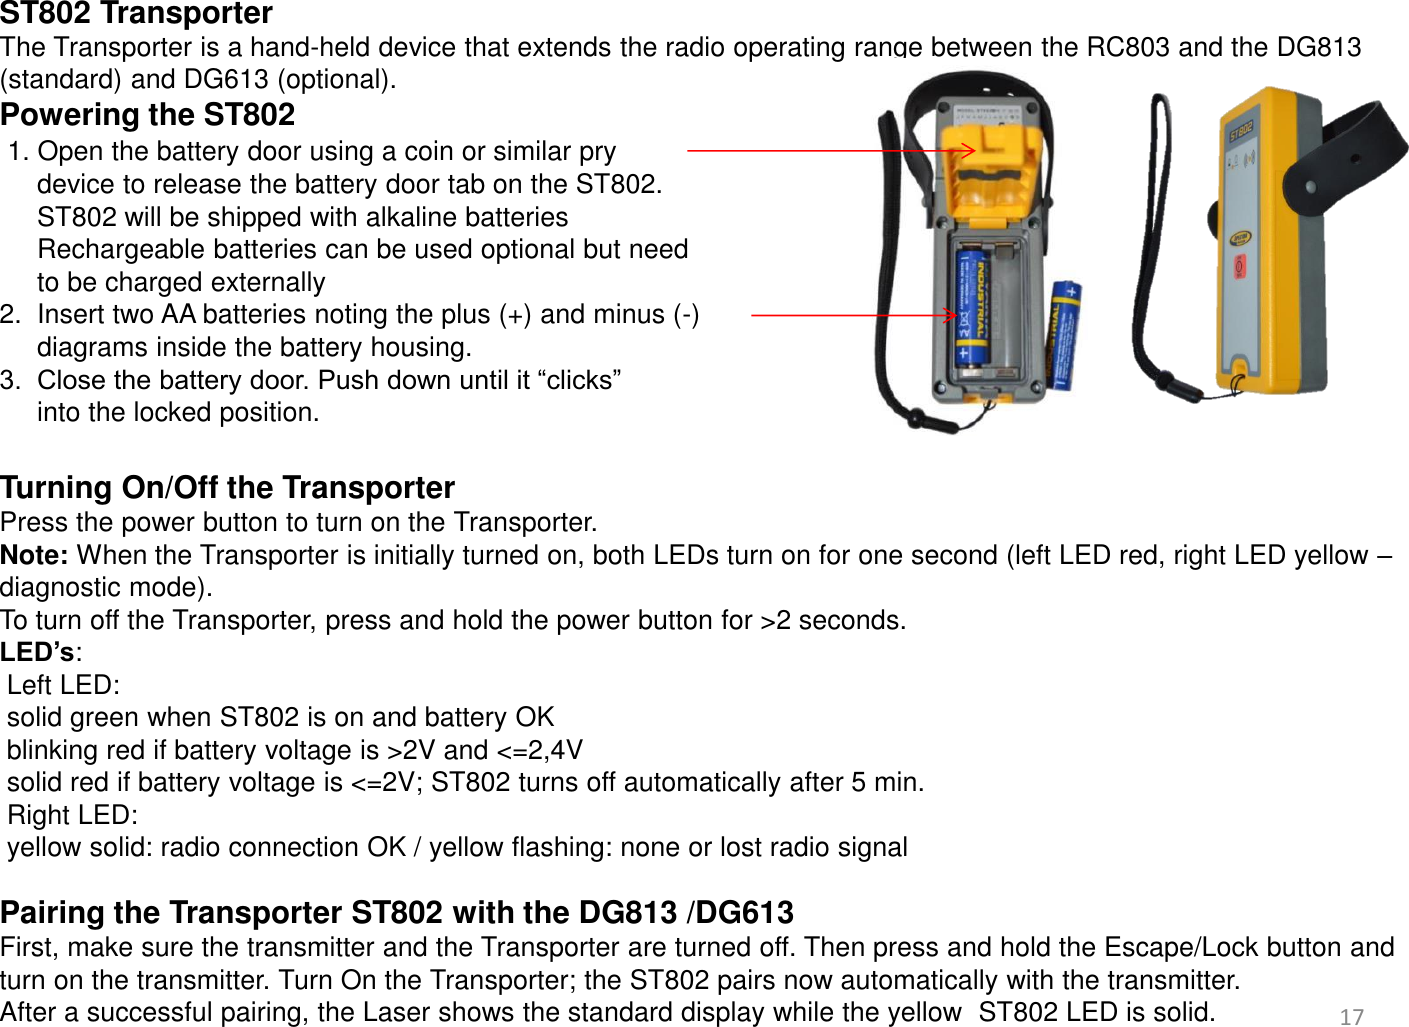  ST802 Transporter The Transporter is a hand-held device that extends the radio operating range between the RC803 and the DG813 (standard) and DG613 (optional). Powering the ST802   1. Open the battery door using a coin or similar pry       device to release the battery door tab on the ST802.      ST802 will be shipped with alkaline batteries      Rechargeable batteries can be used optional but need       to be charged externally 2.  Insert two AA batteries noting the plus (+) and minus (-)       diagrams inside the battery housing. 3.  Close the battery door. Push down until it “clicks”       into the locked position.  Turning On/Off the Transporter Press the power button to turn on the Transporter.  Note: When the Transporter is initially turned on, both LEDs turn on for one second (left LED red, right LED yellow – diagnostic mode).  To turn off the Transporter, press and hold the power button for &gt;2 seconds. LED’s:  Left LED:   solid green when ST802 is on and battery OK   blinking red if battery voltage is &gt;2V and &lt;=2,4V  solid red if battery voltage is &lt;=2V; ST802 turns off automatically after 5 min.   Right LED:  yellow solid: radio connection OK / yellow flashing: none or lost radio signal  Pairing the Transporter ST802 with the DG813 /DG613 First, make sure the transmitter and the Transporter are turned off. Then press and hold the Escape/Lock button and turn on the transmitter. Turn On the Transporter; the ST802 pairs now automatically with the transmitter.  After a successful pairing, the Laser shows the standard display while the yellow  ST802 LED is solid.   17 